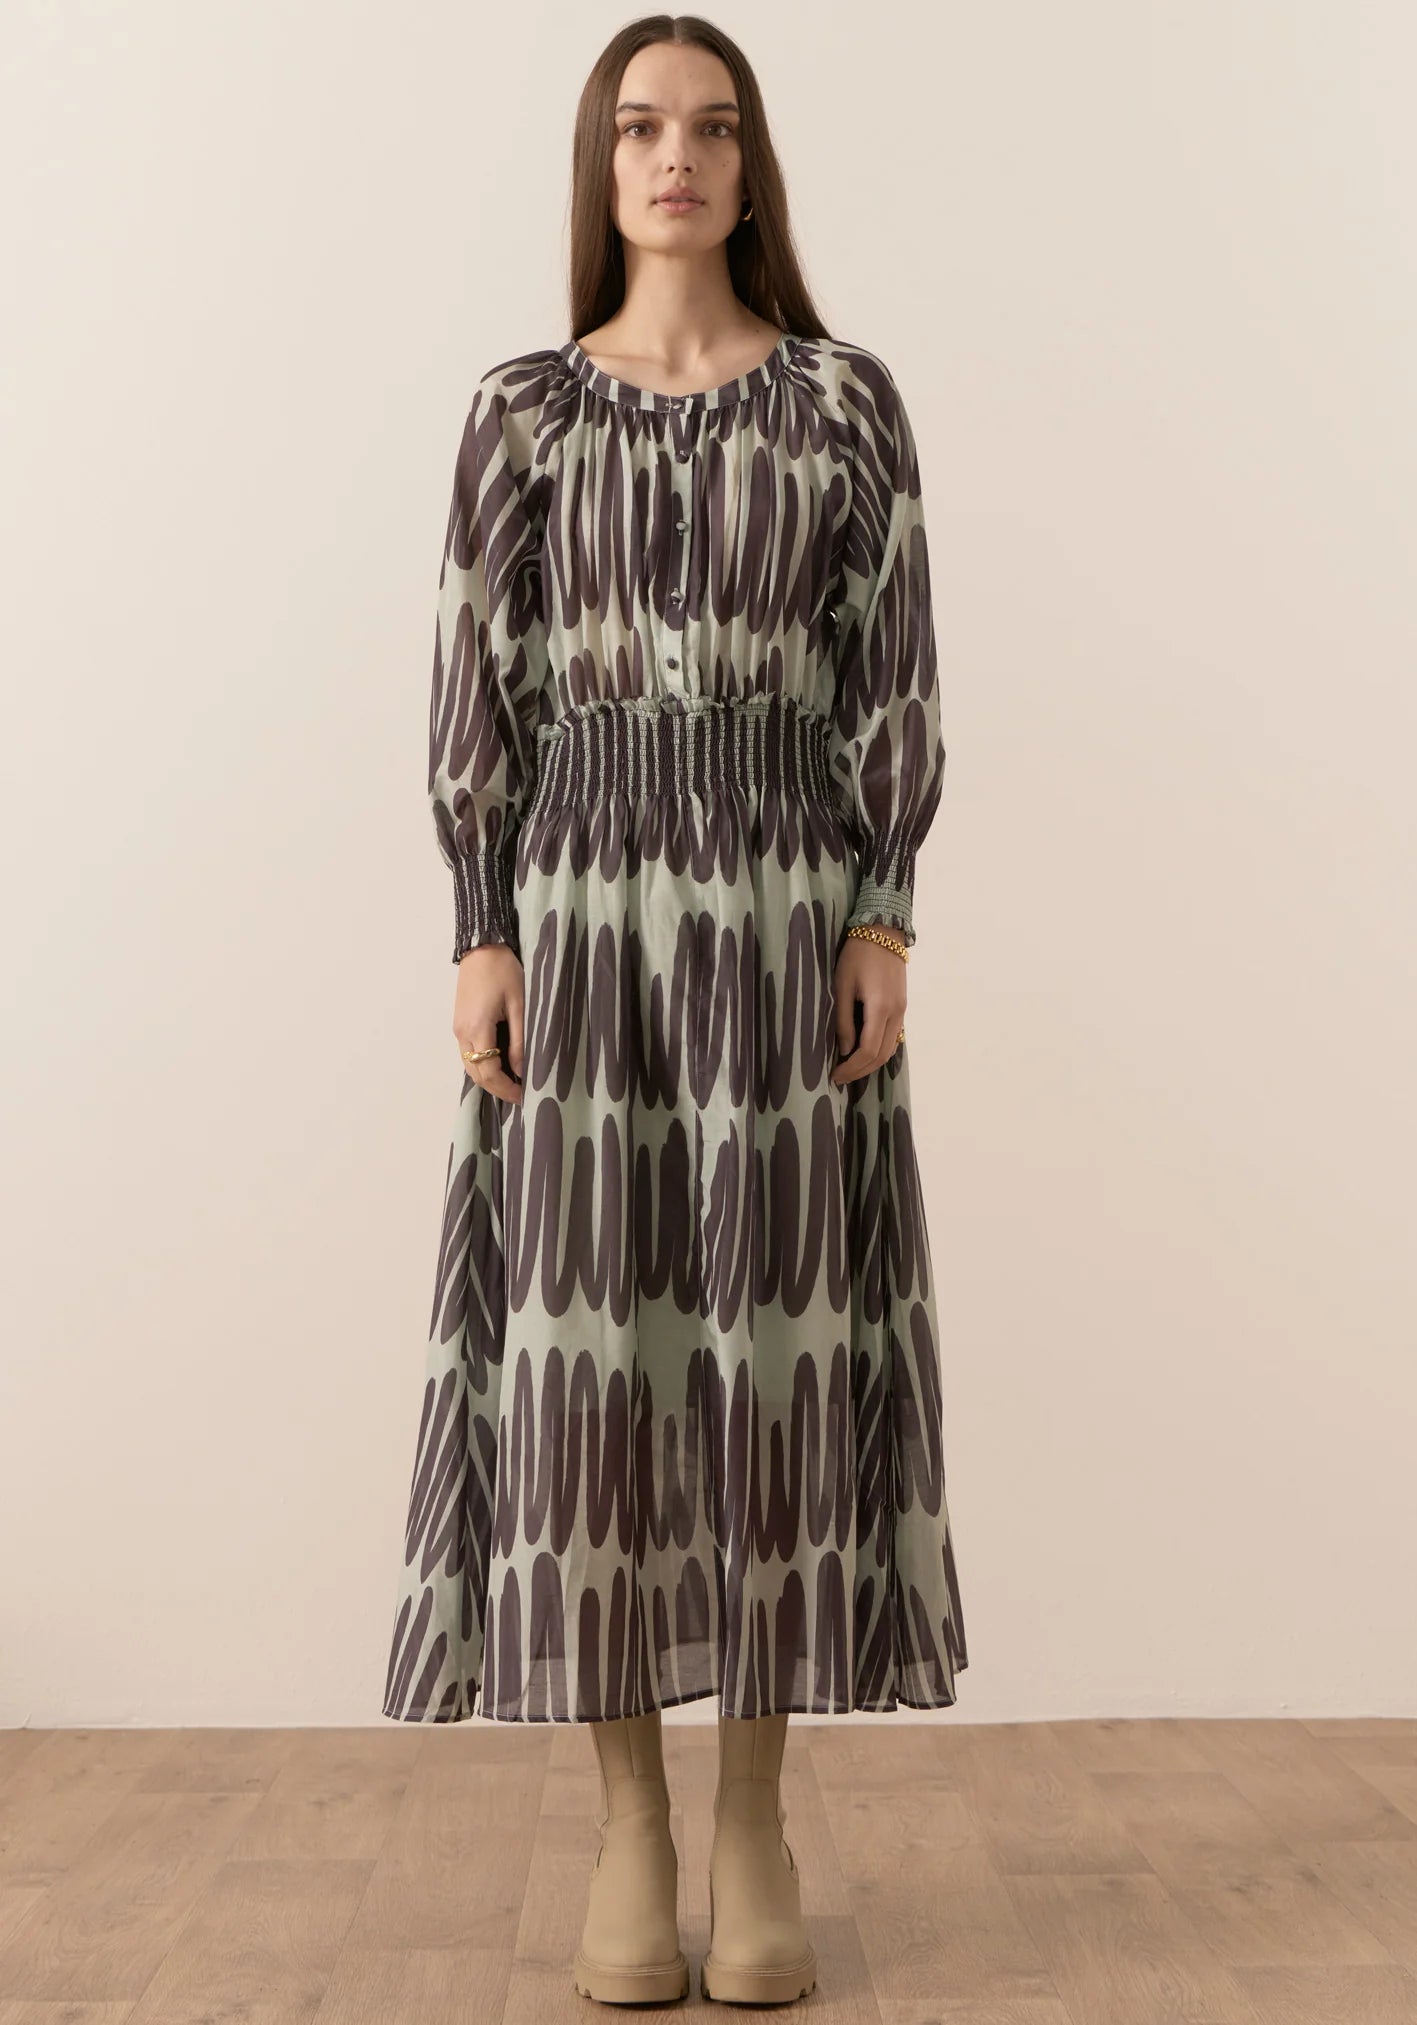 POL - Quill Shirred Dress - Quill Print